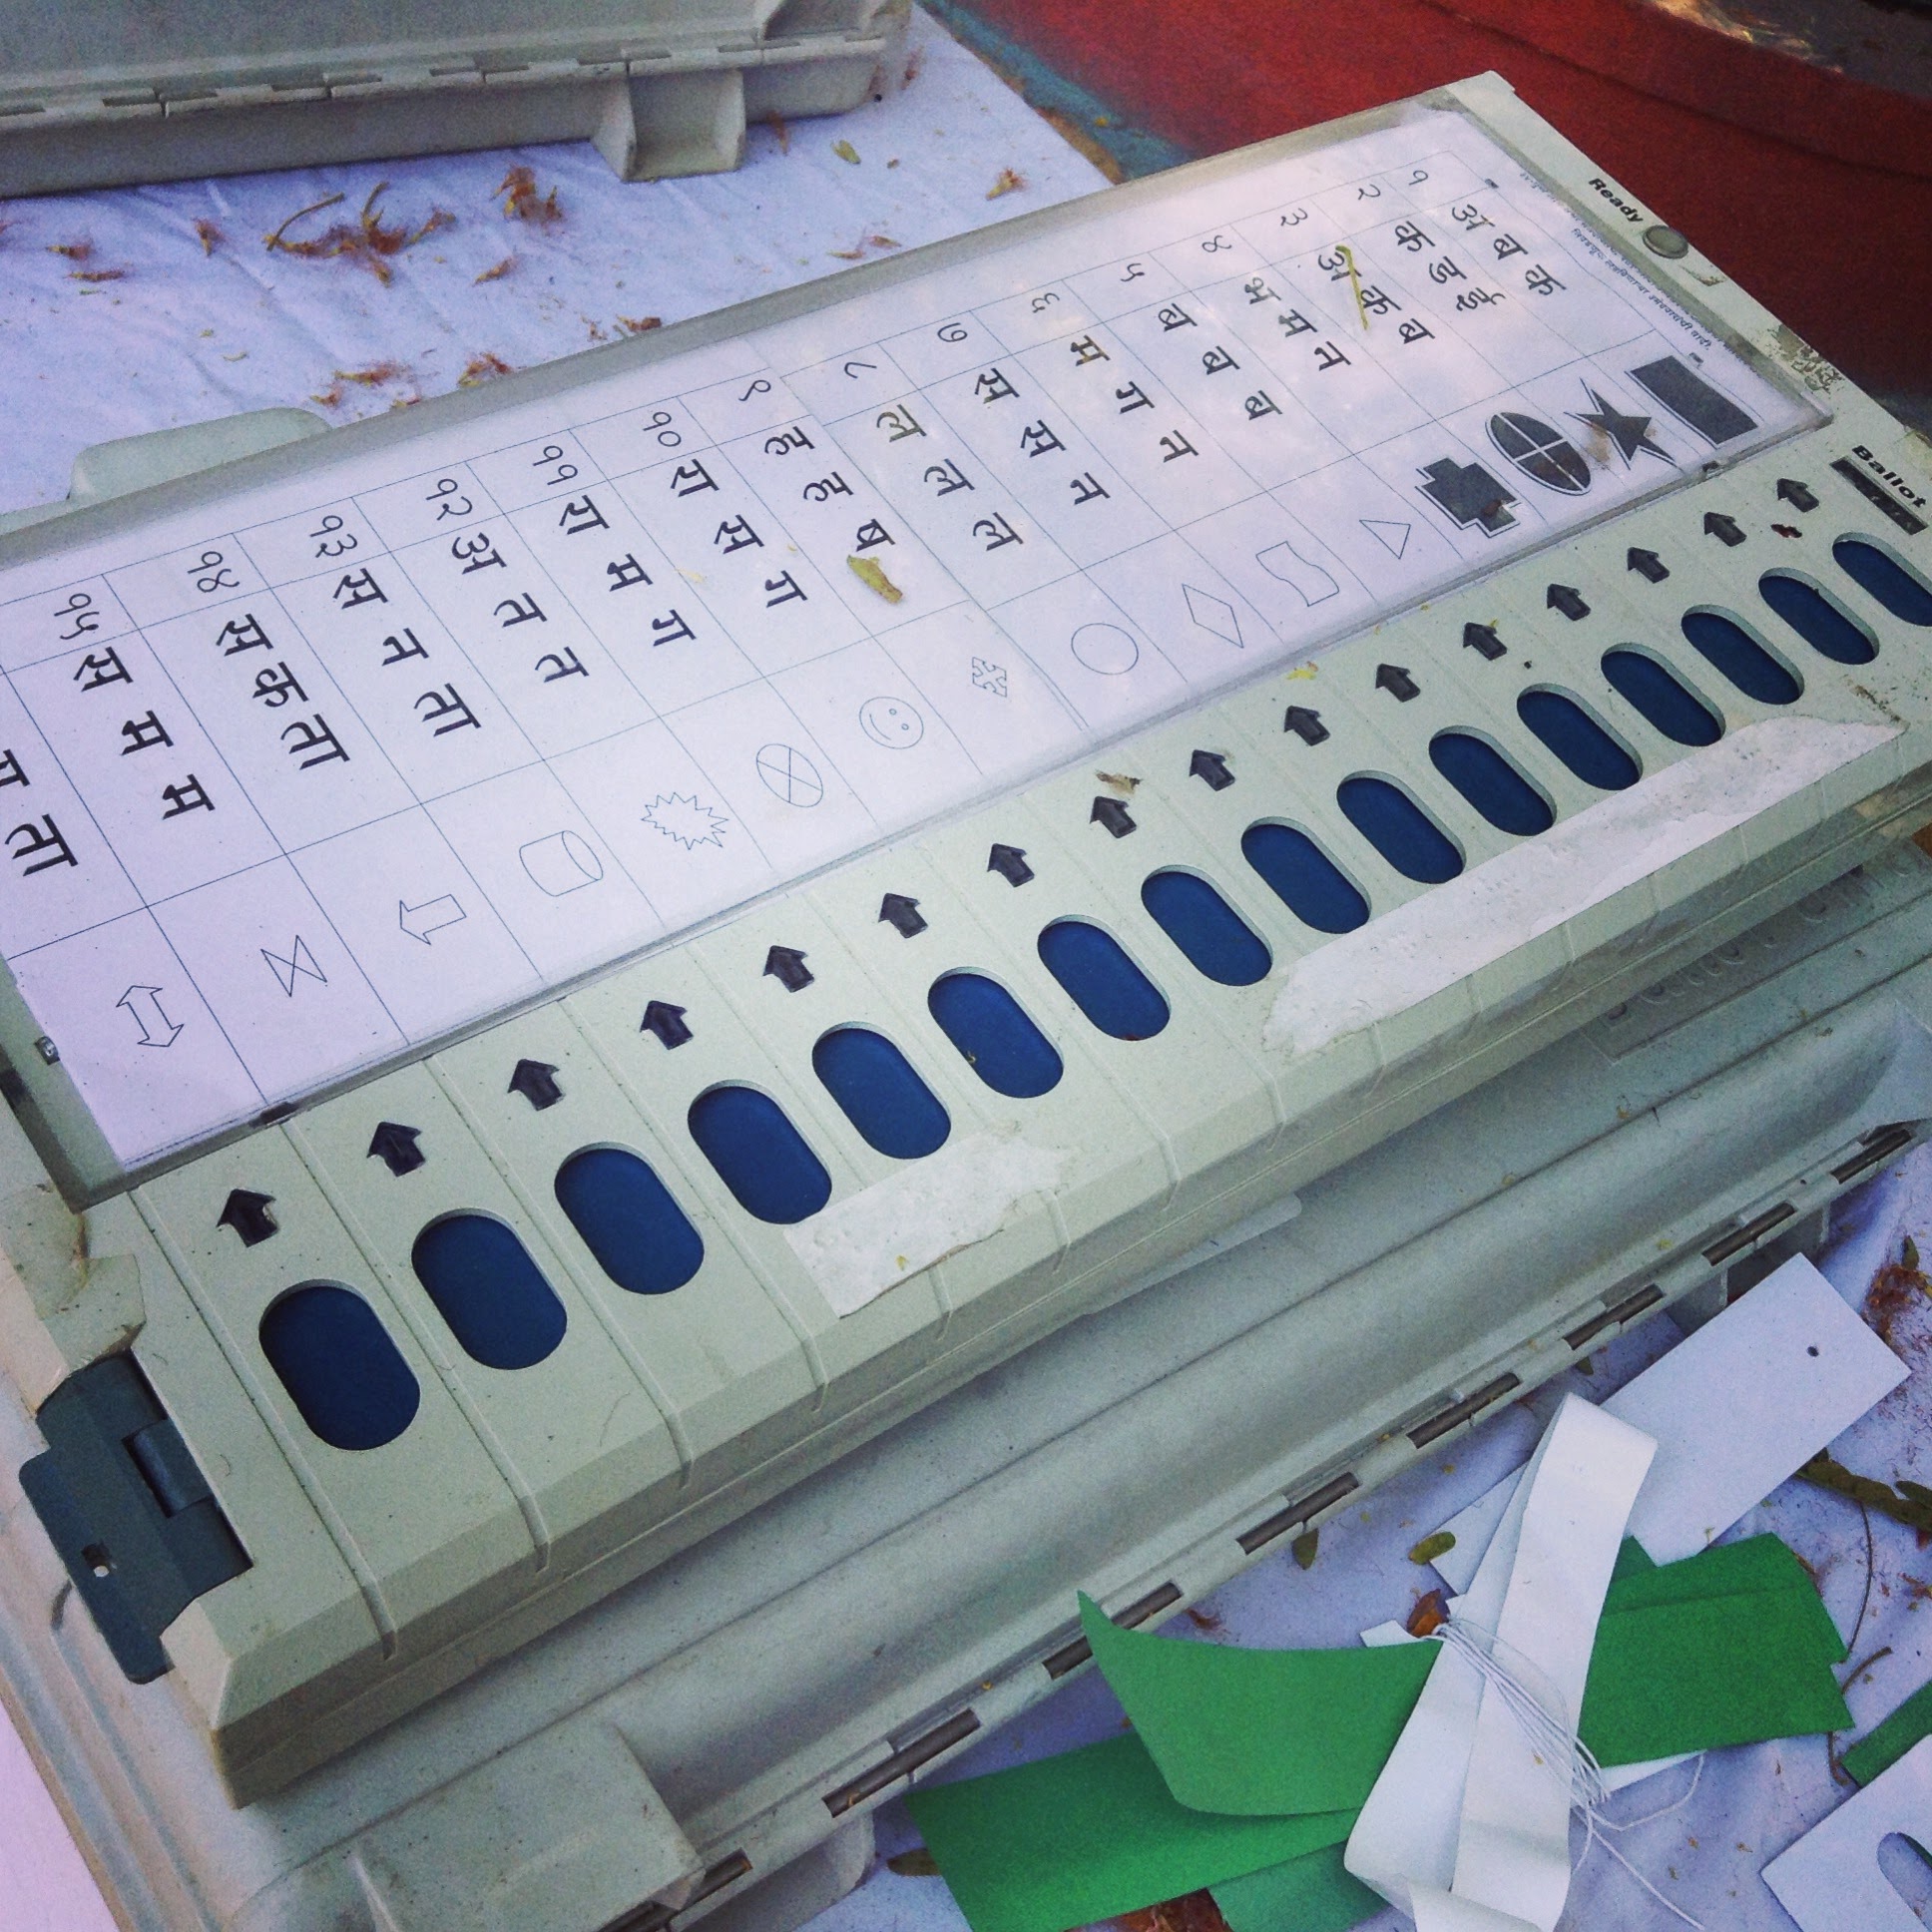 Self proclaimed cyber expert alleges 2014 elections were rigged, EVMs could be hacked